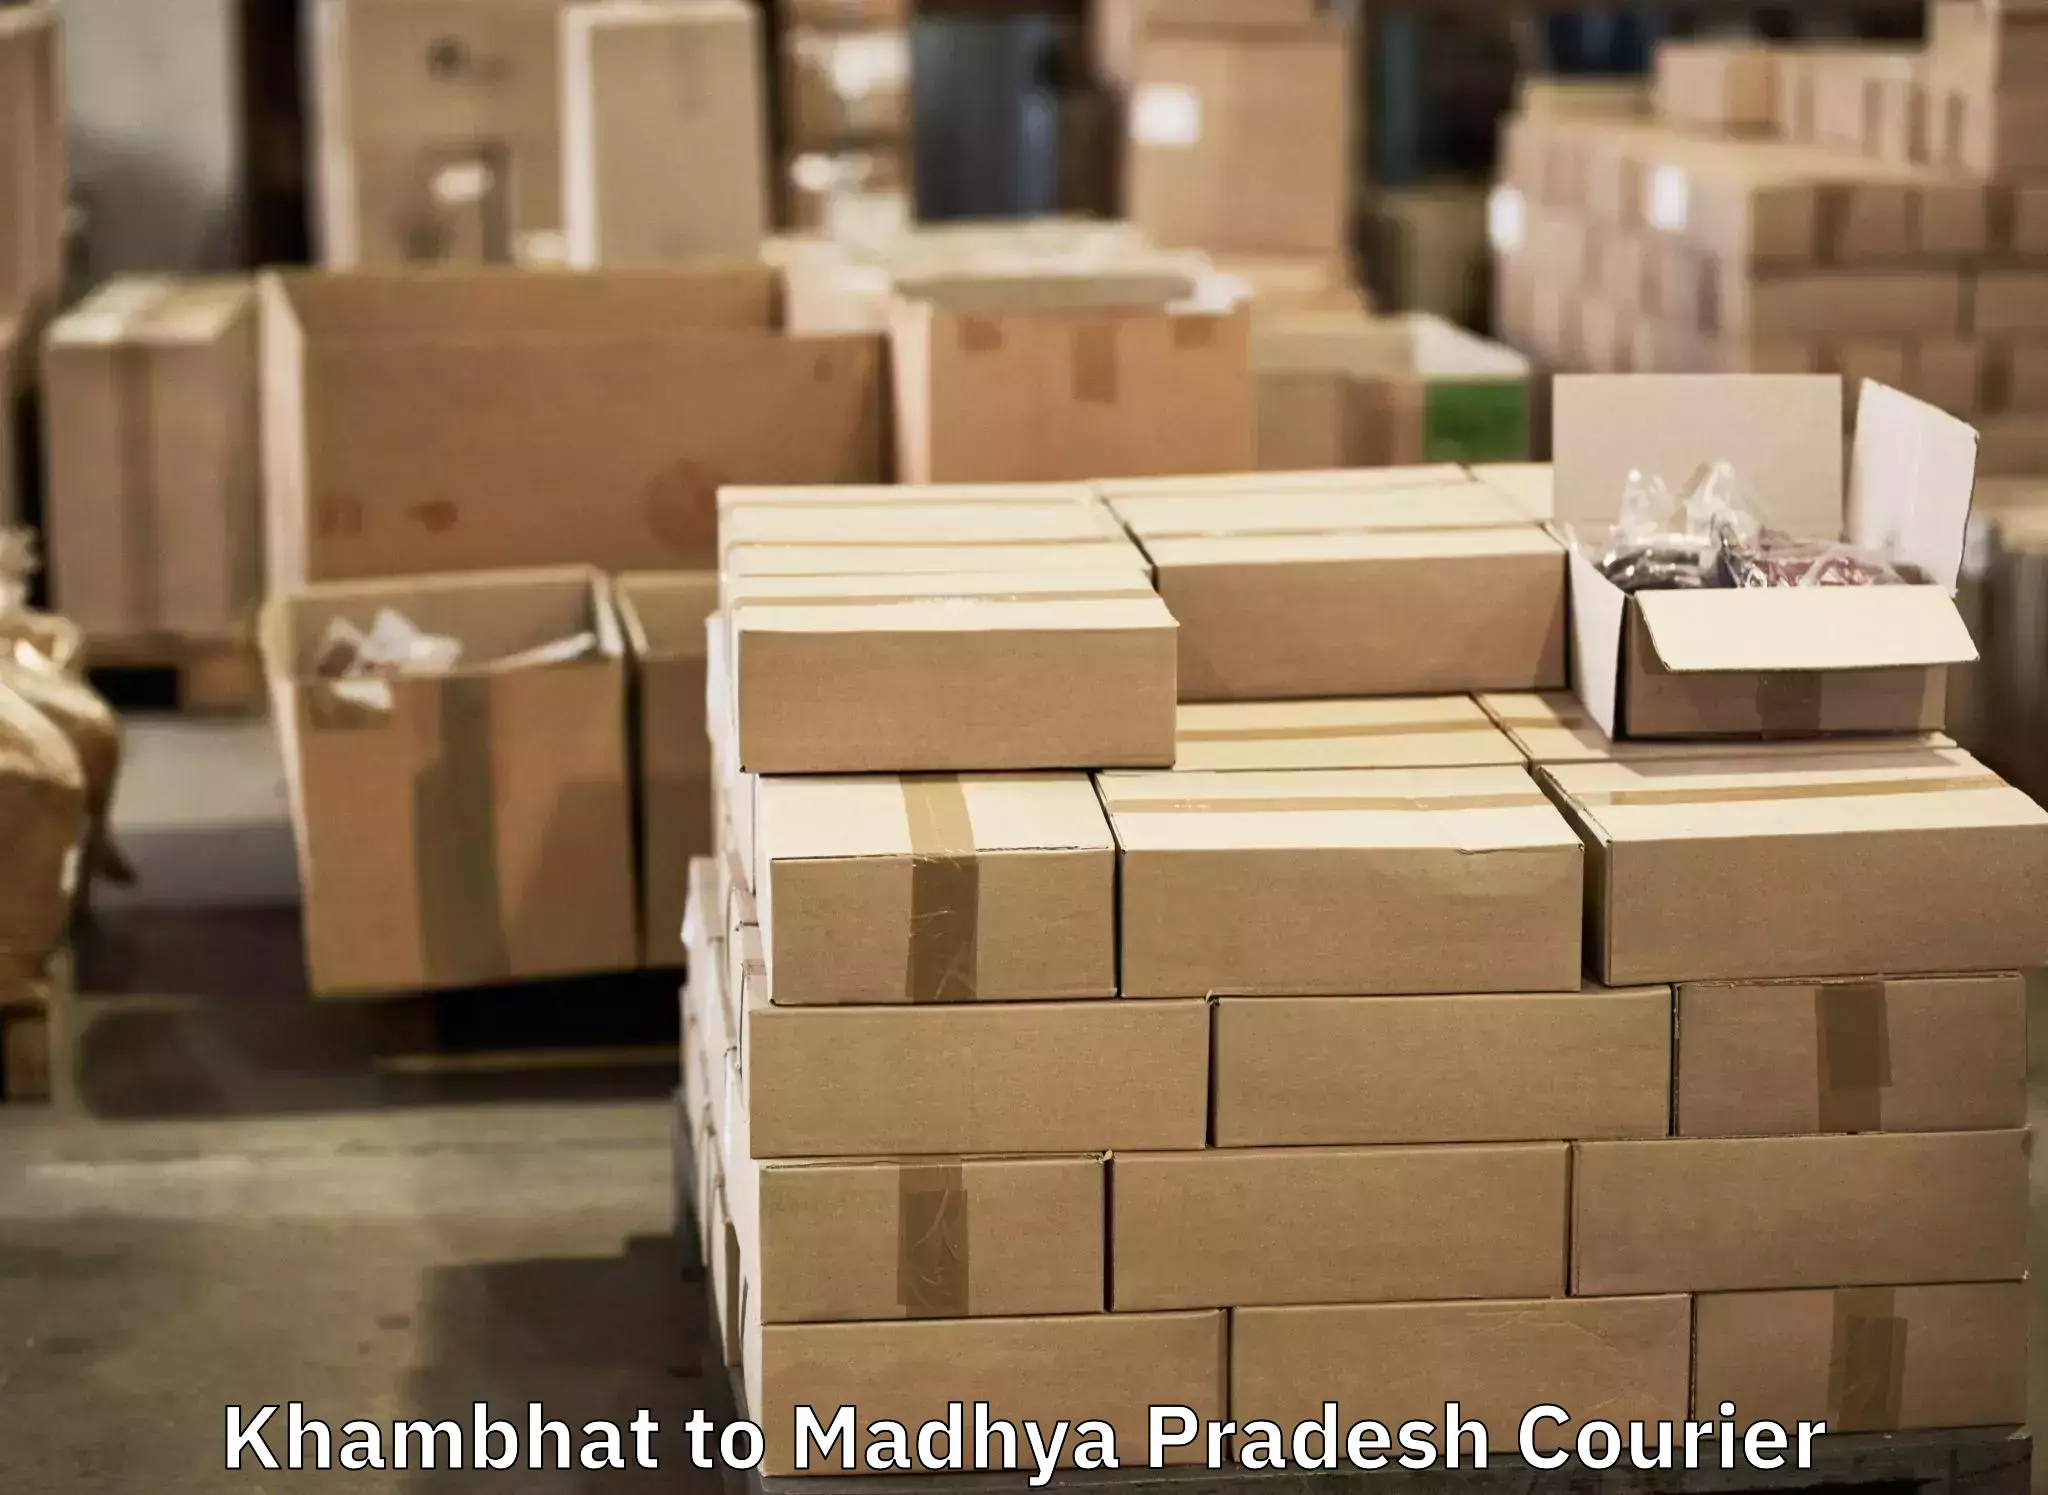 Instant baggage transport quote Khambhat to Bhopal